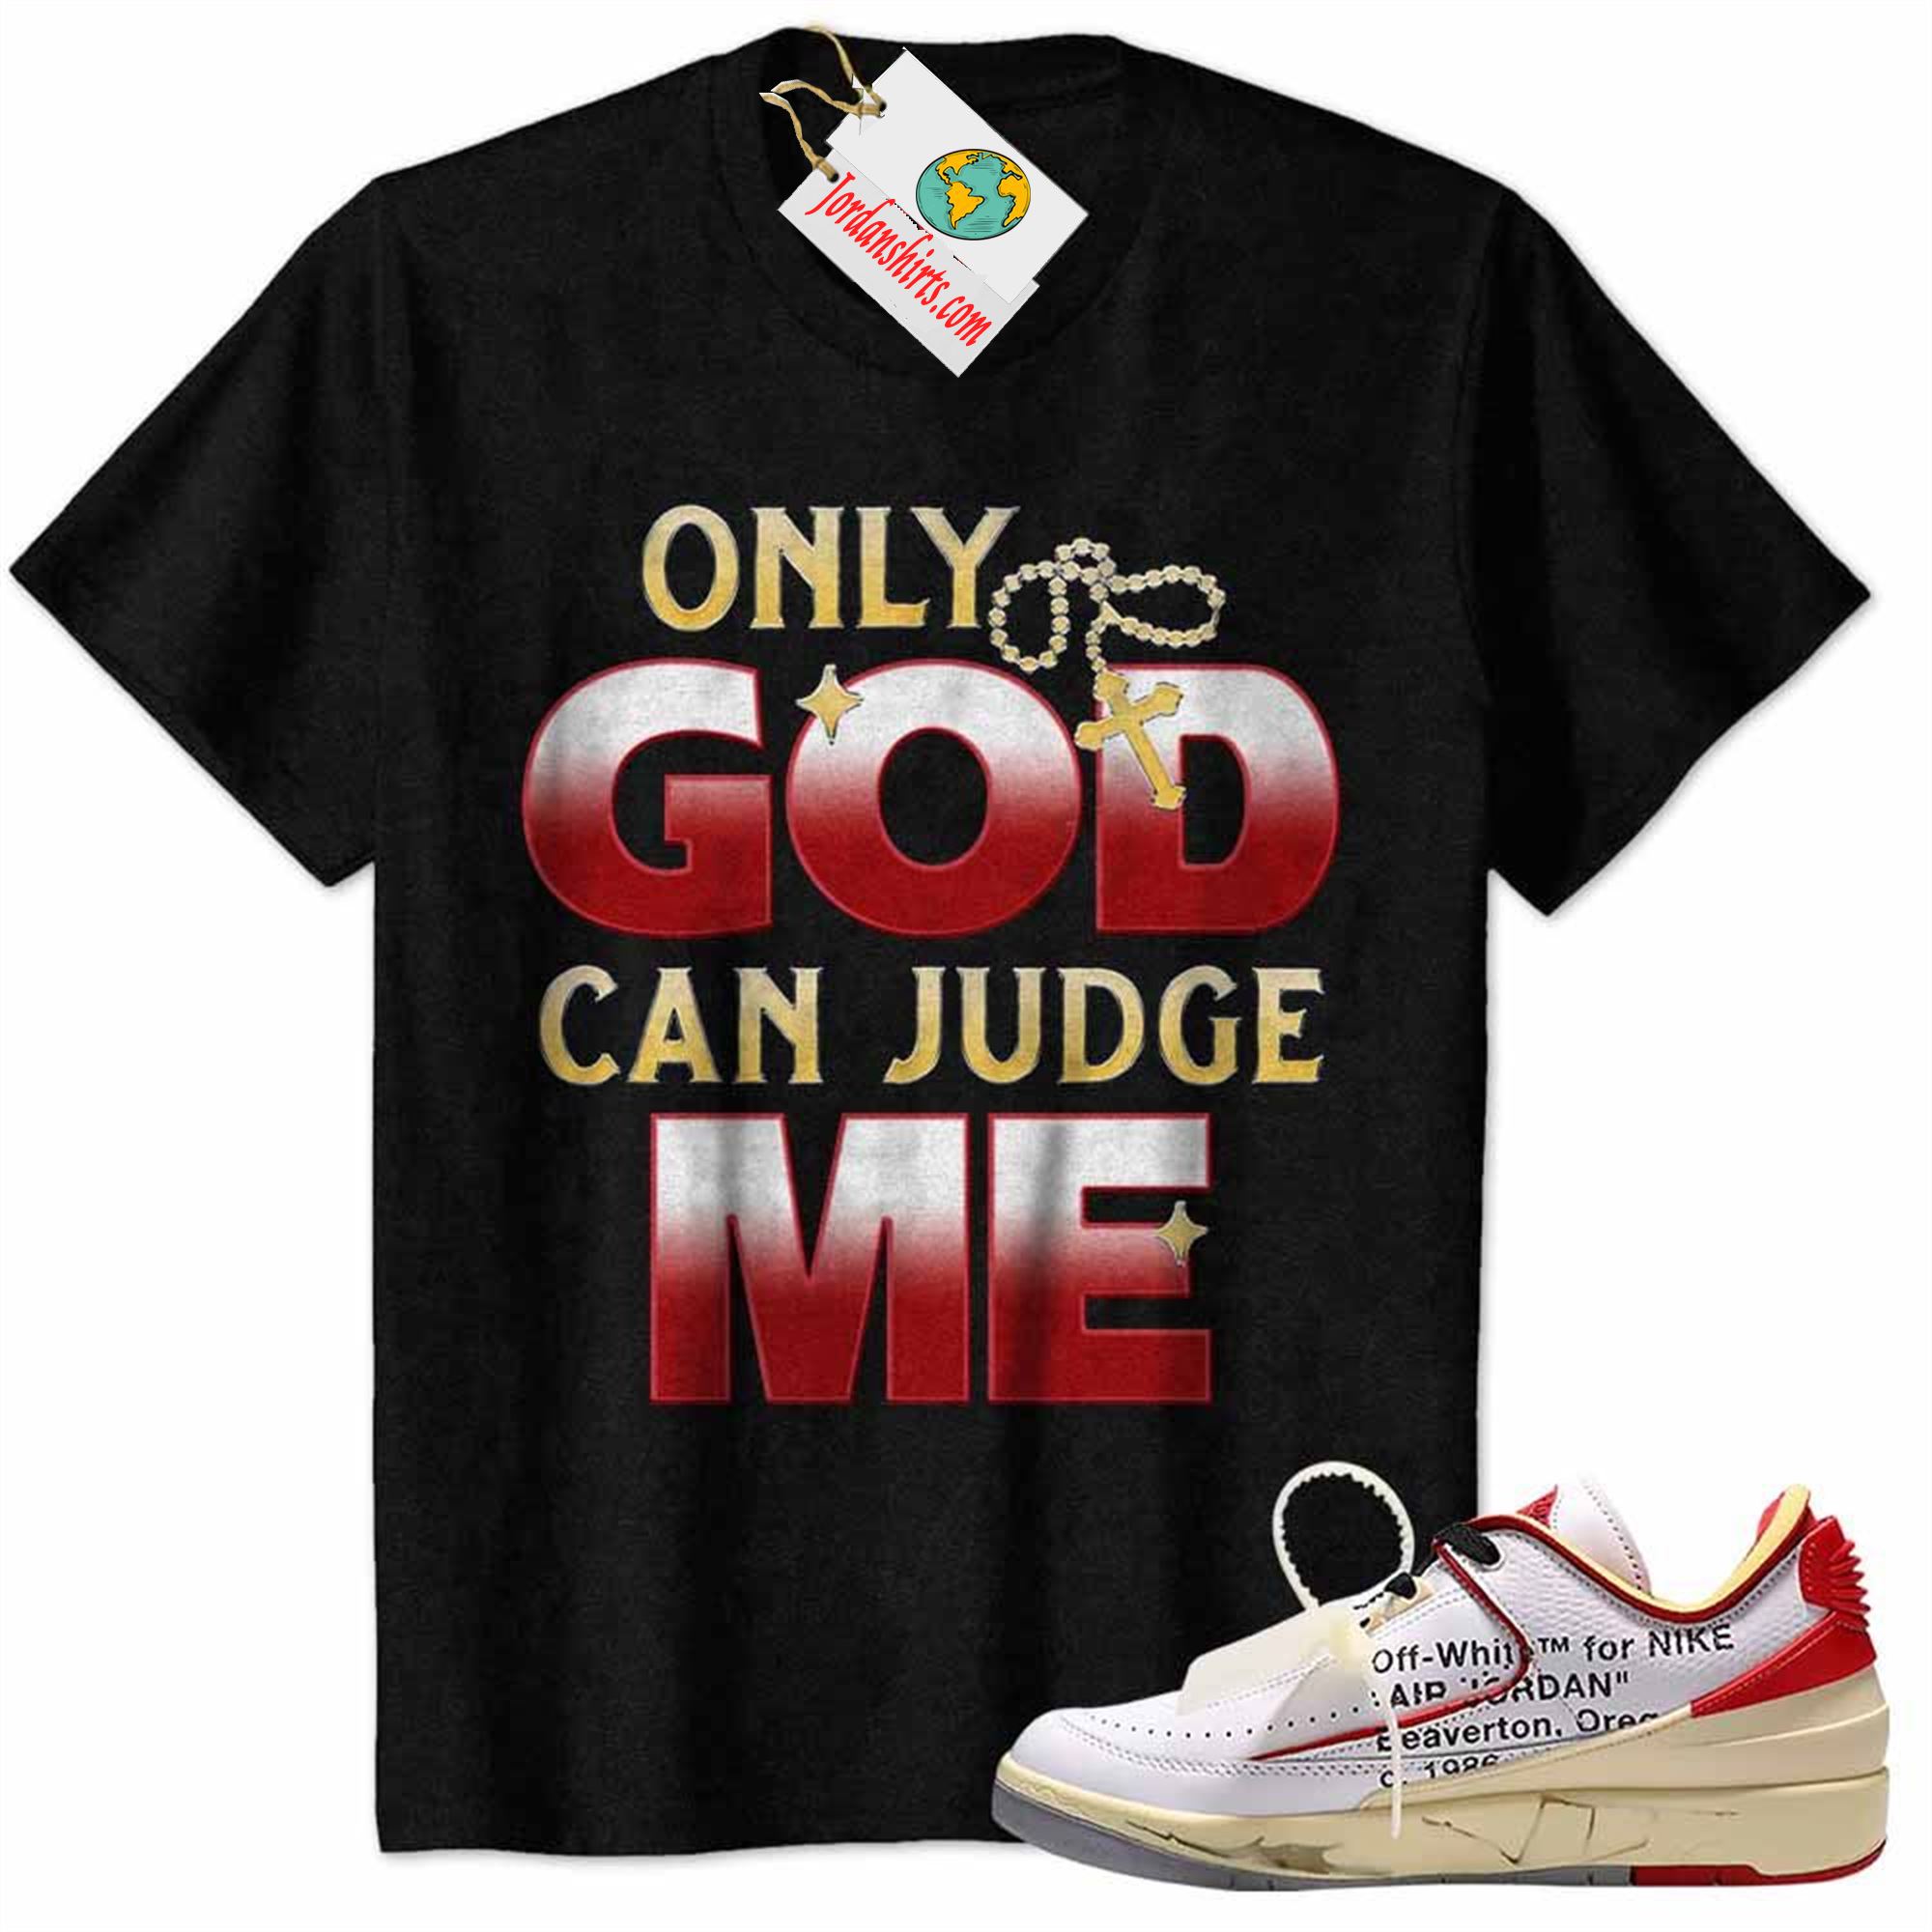 Jordan 2 Shirt, Only God Can Judge Me Black Air Jordan 2 Low White Red Off-white 2s Size Up To 5xl